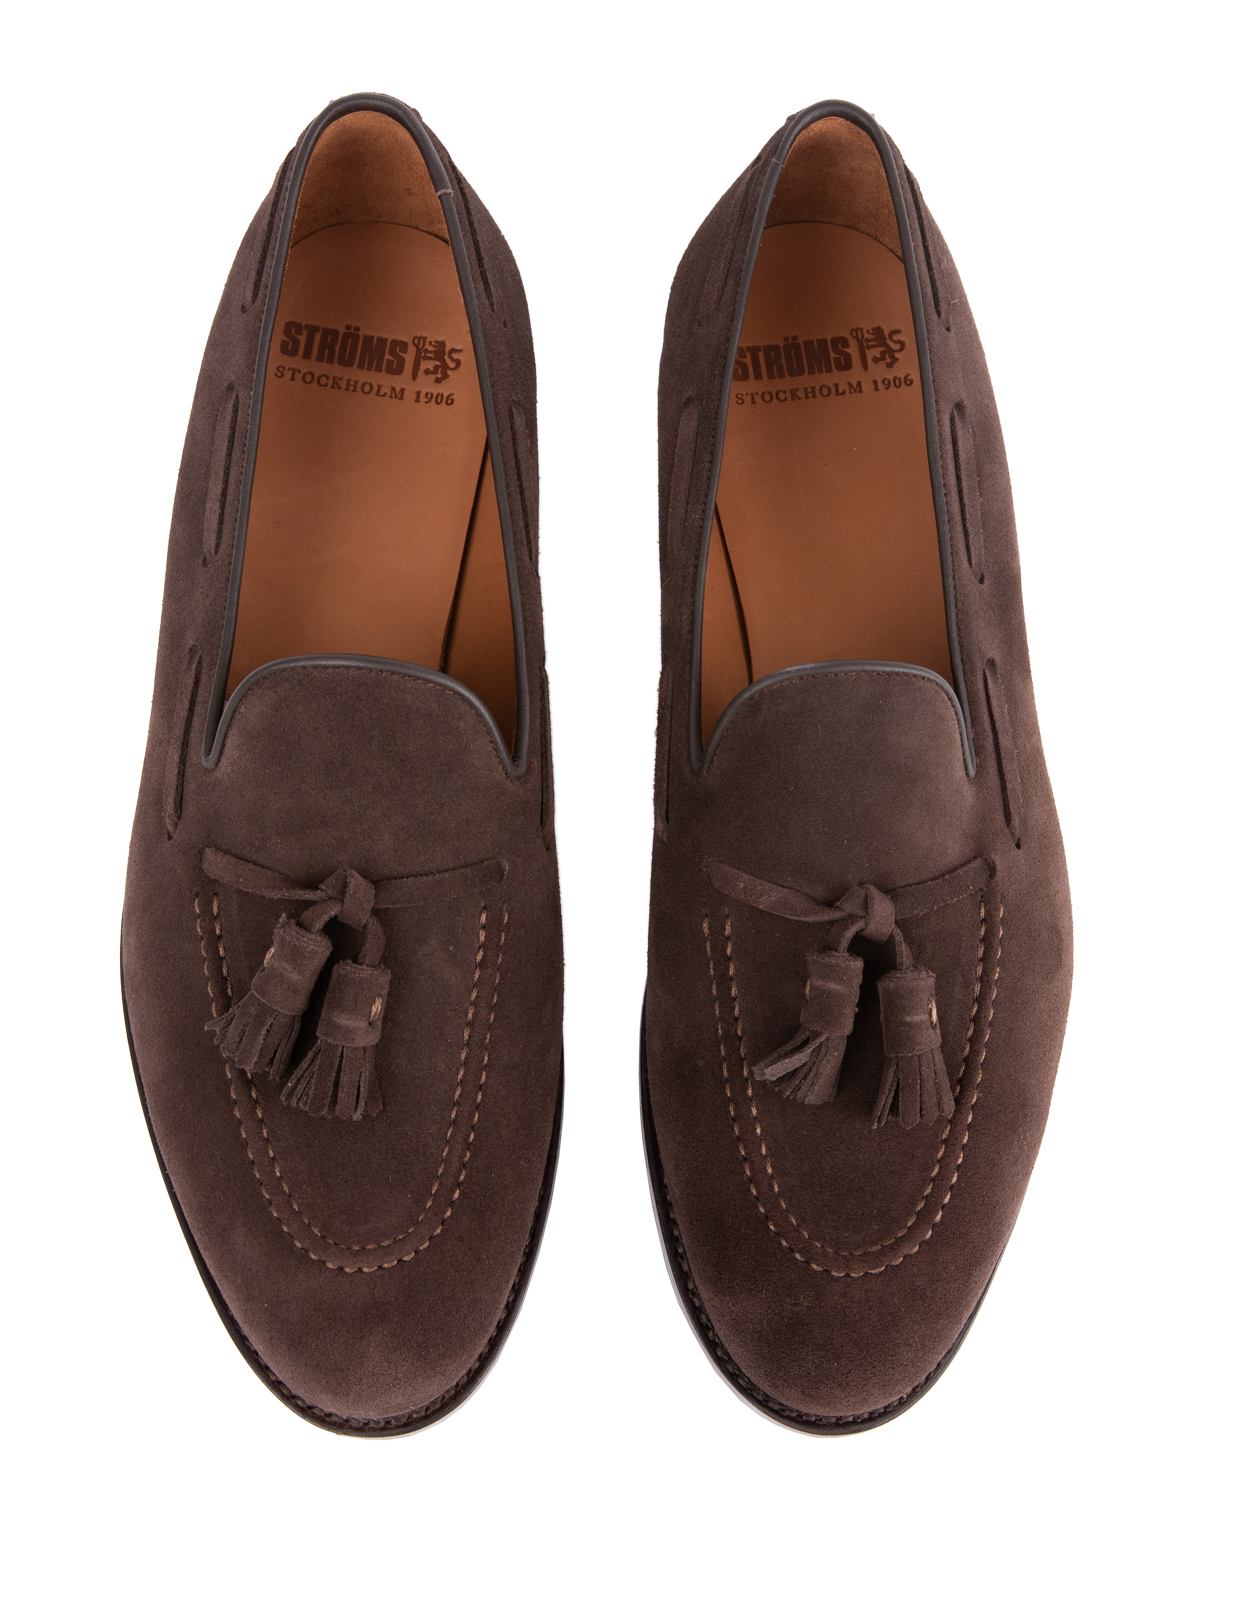 Tassel Loafers Suede Bitter Chocolate Stl 8